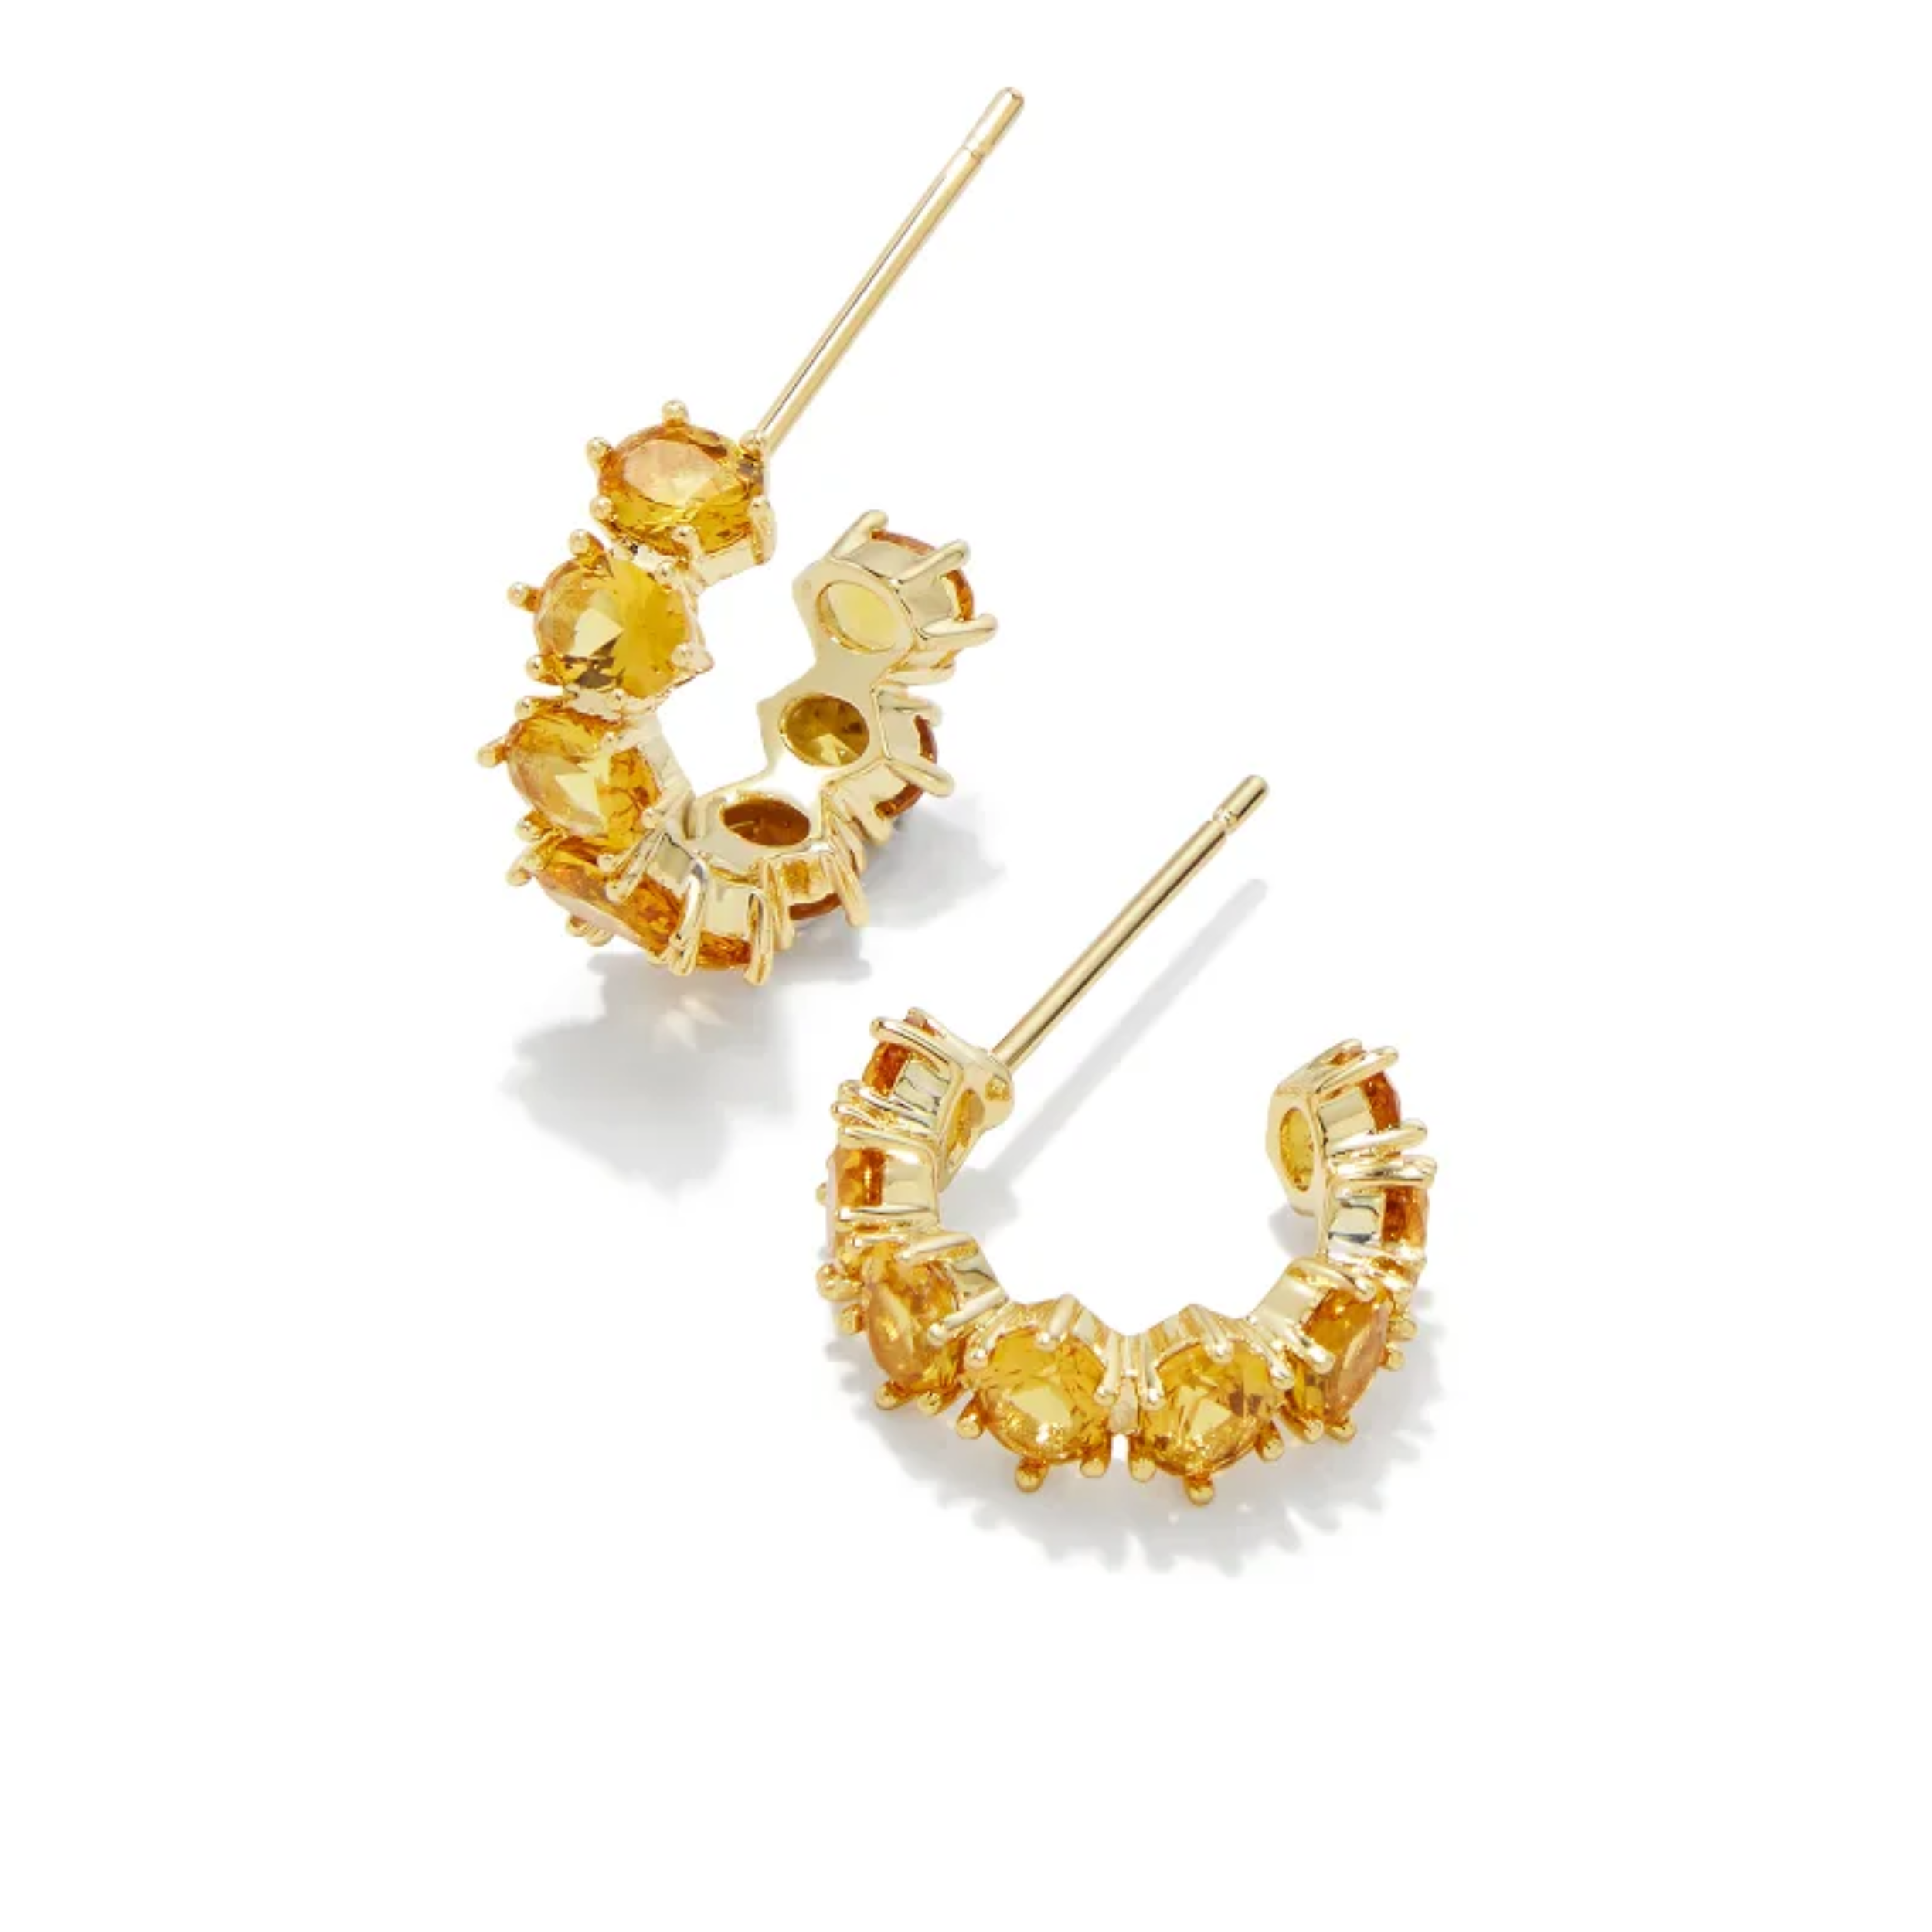 These Cailin Gold Crystal Huggie Earrings in Golden Yellow by Kendra Scott are pictured on a white background.